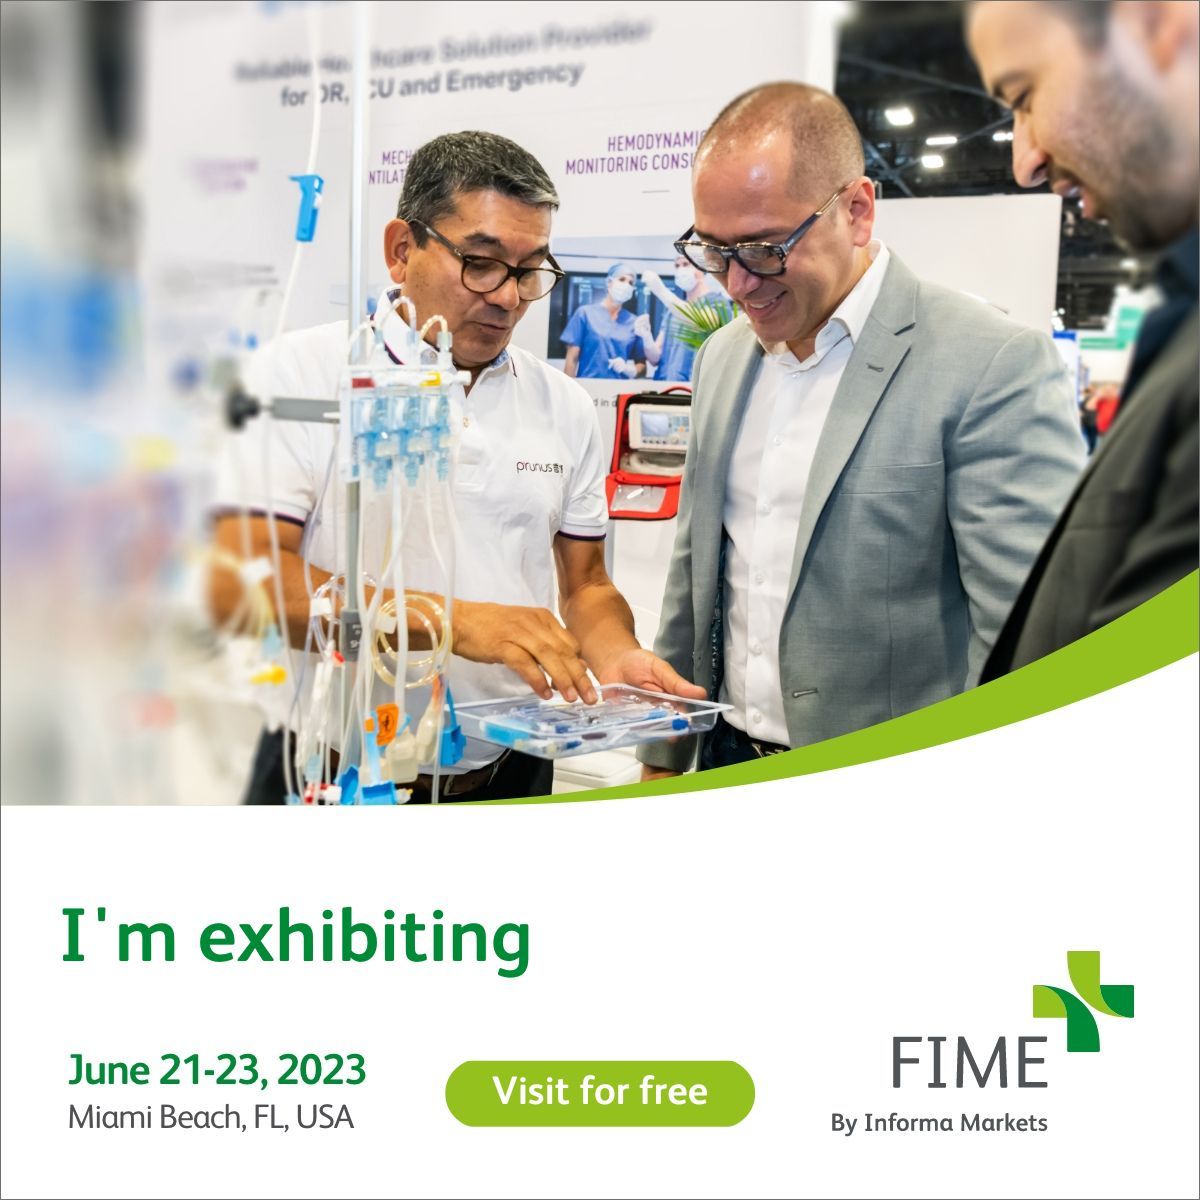 See you at FIME!